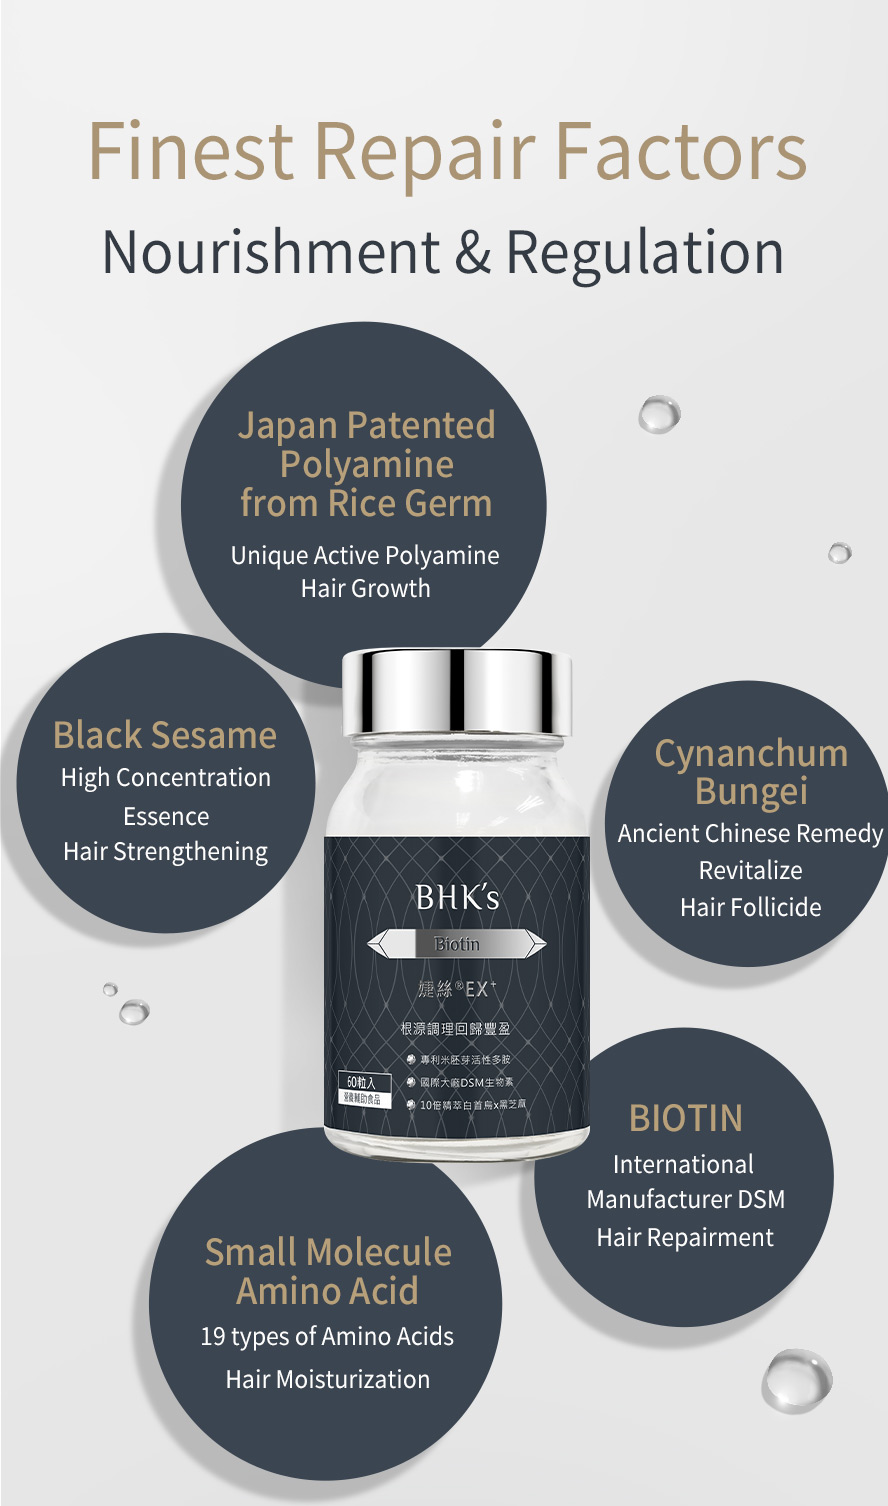 BHKs Biotin EX+ is an innovative product for hair treatment to stimulates hair growth, repair damaged hair and strengthen hair.